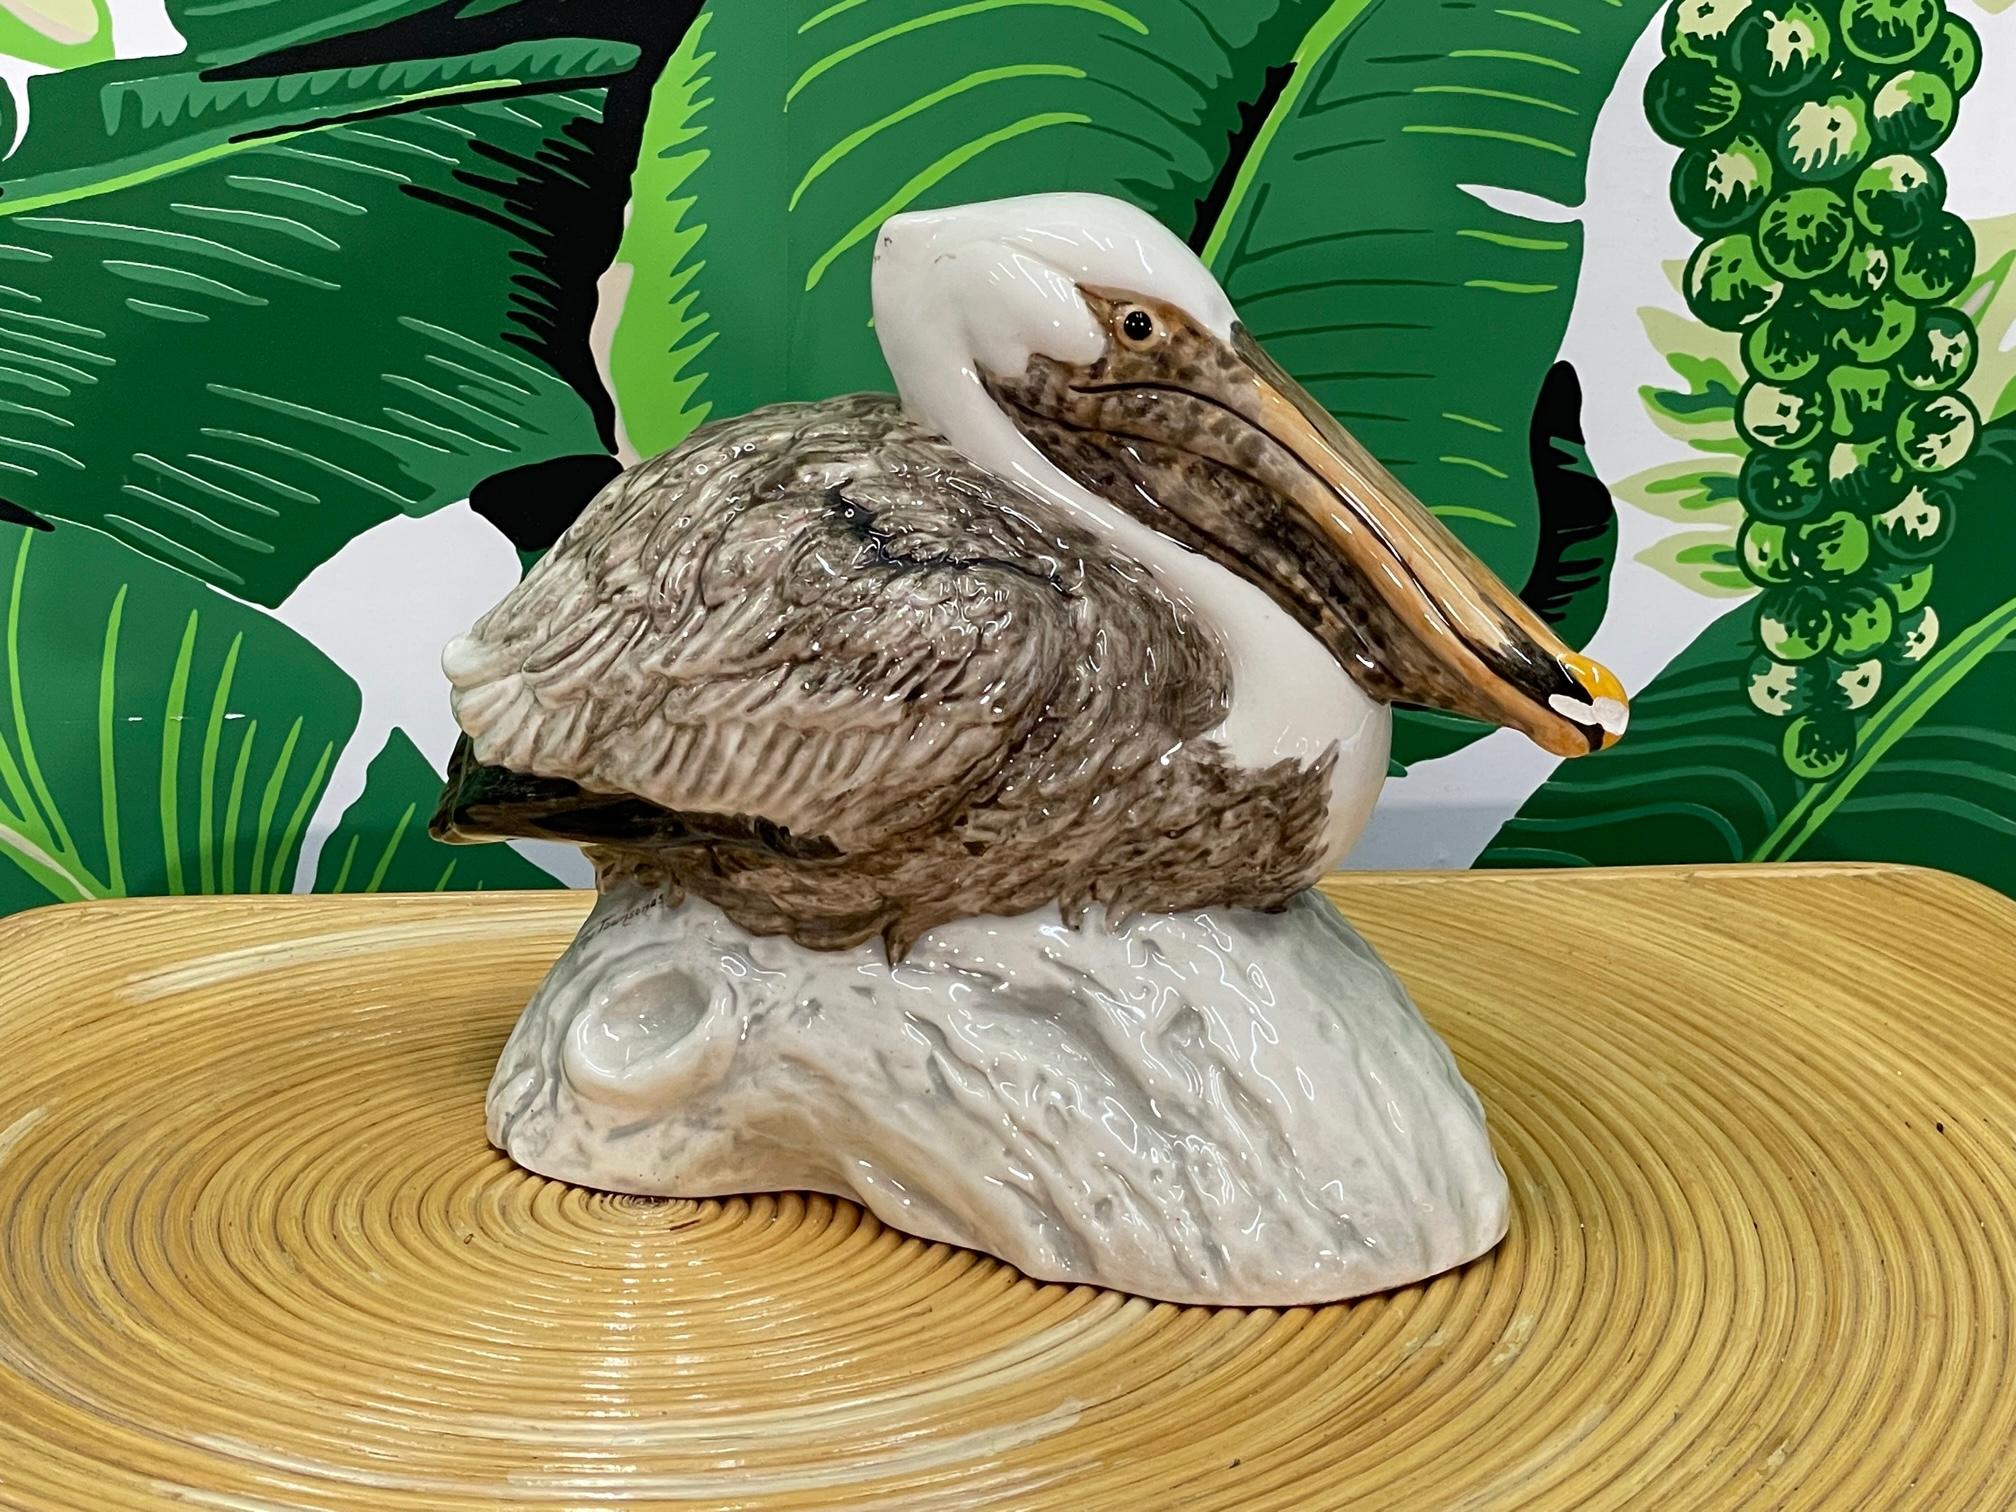 Ceramic pelican figurine statue features a colorful hand painted finish with a glossy glaze. Good condition with small chip on one side of beak (see photos).
For a shipping quote to your exact zip code, please message us.
